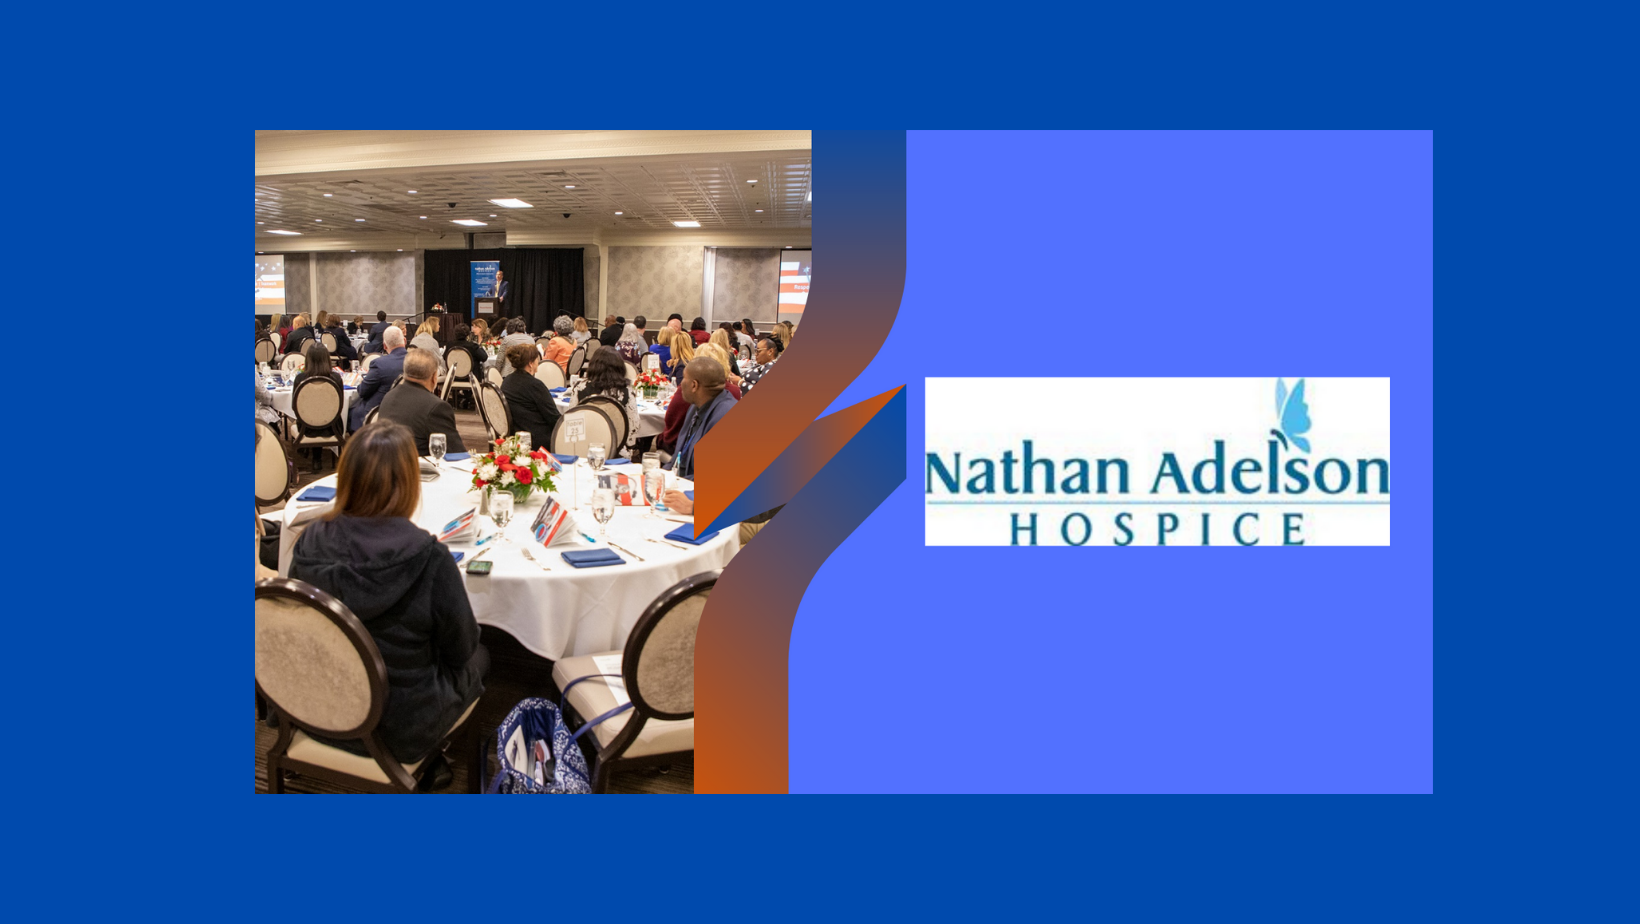 Nathan Adelson Hospice Hosting "Aging with PRIDE in Modern Healthcare